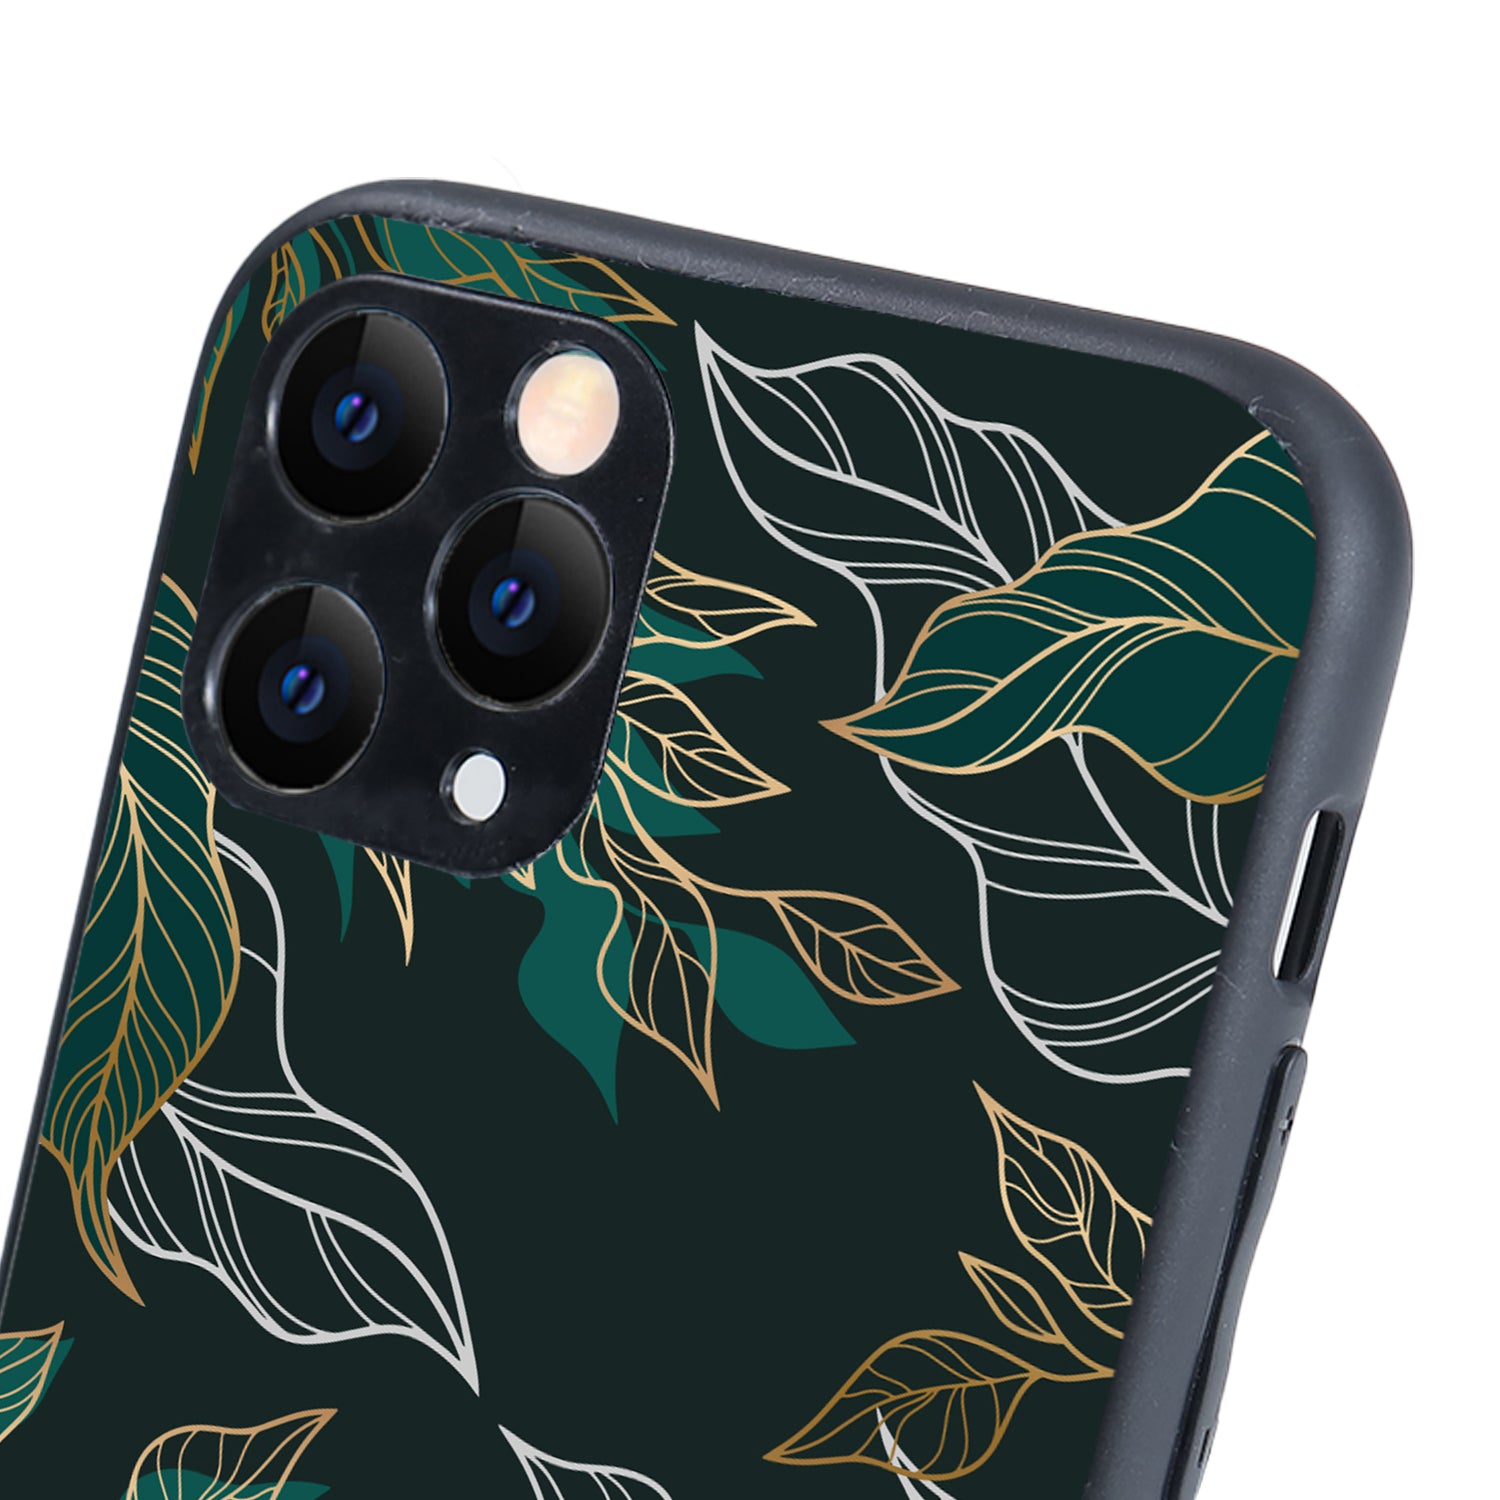 Green Floral iPhone 11 Pro Case